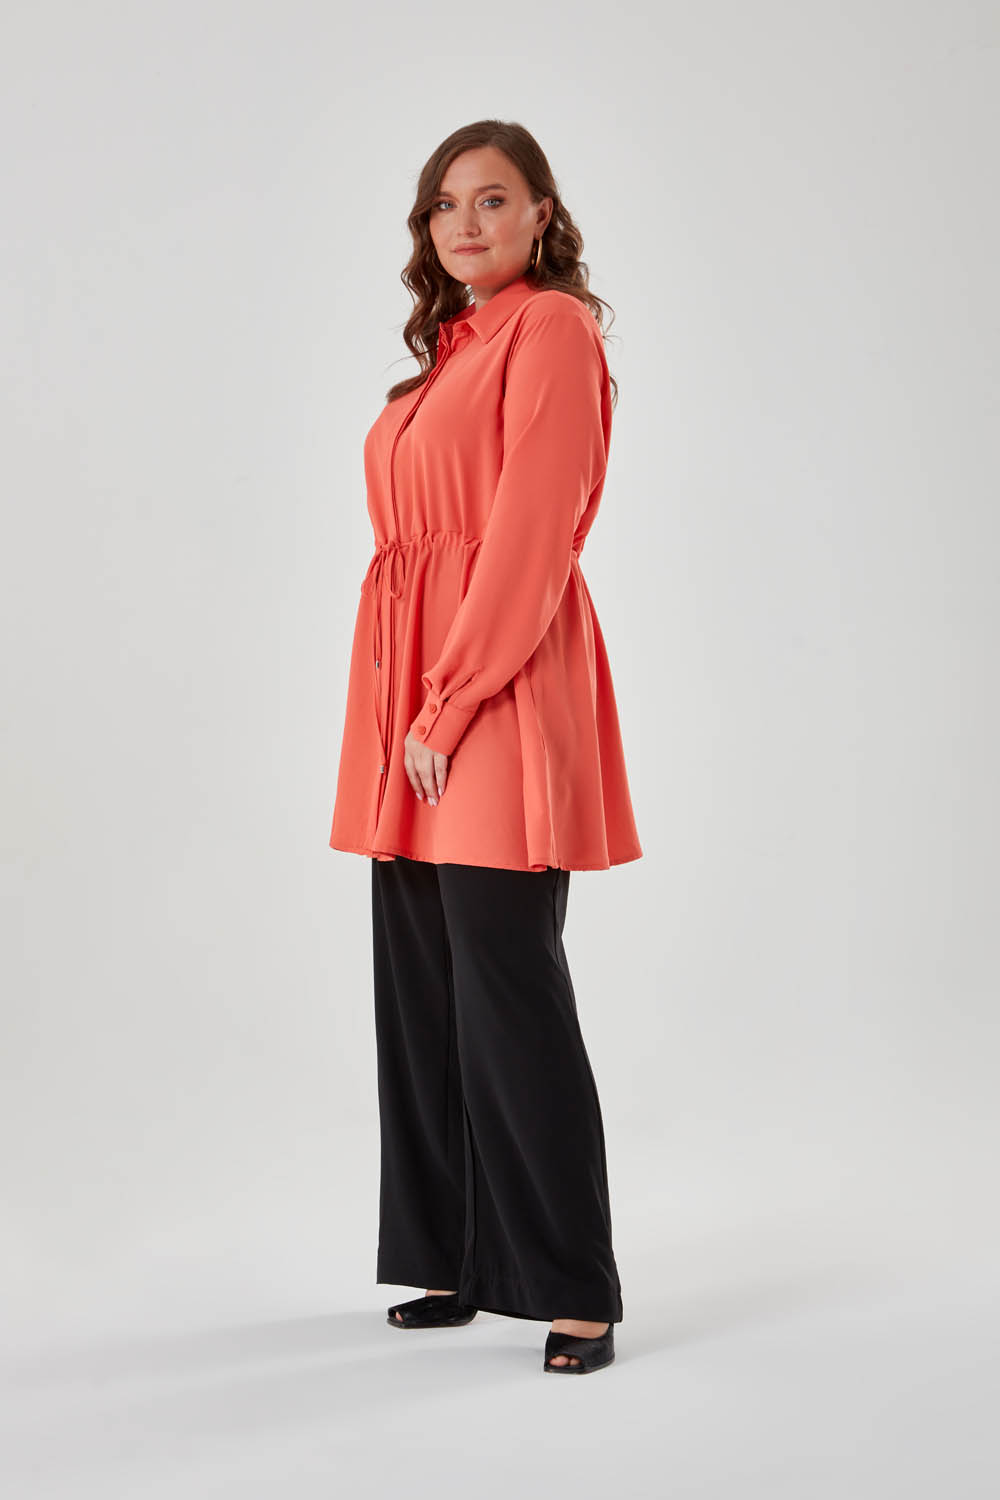 Concealed Plaid Pleated Waist Coral Shirt Tunic